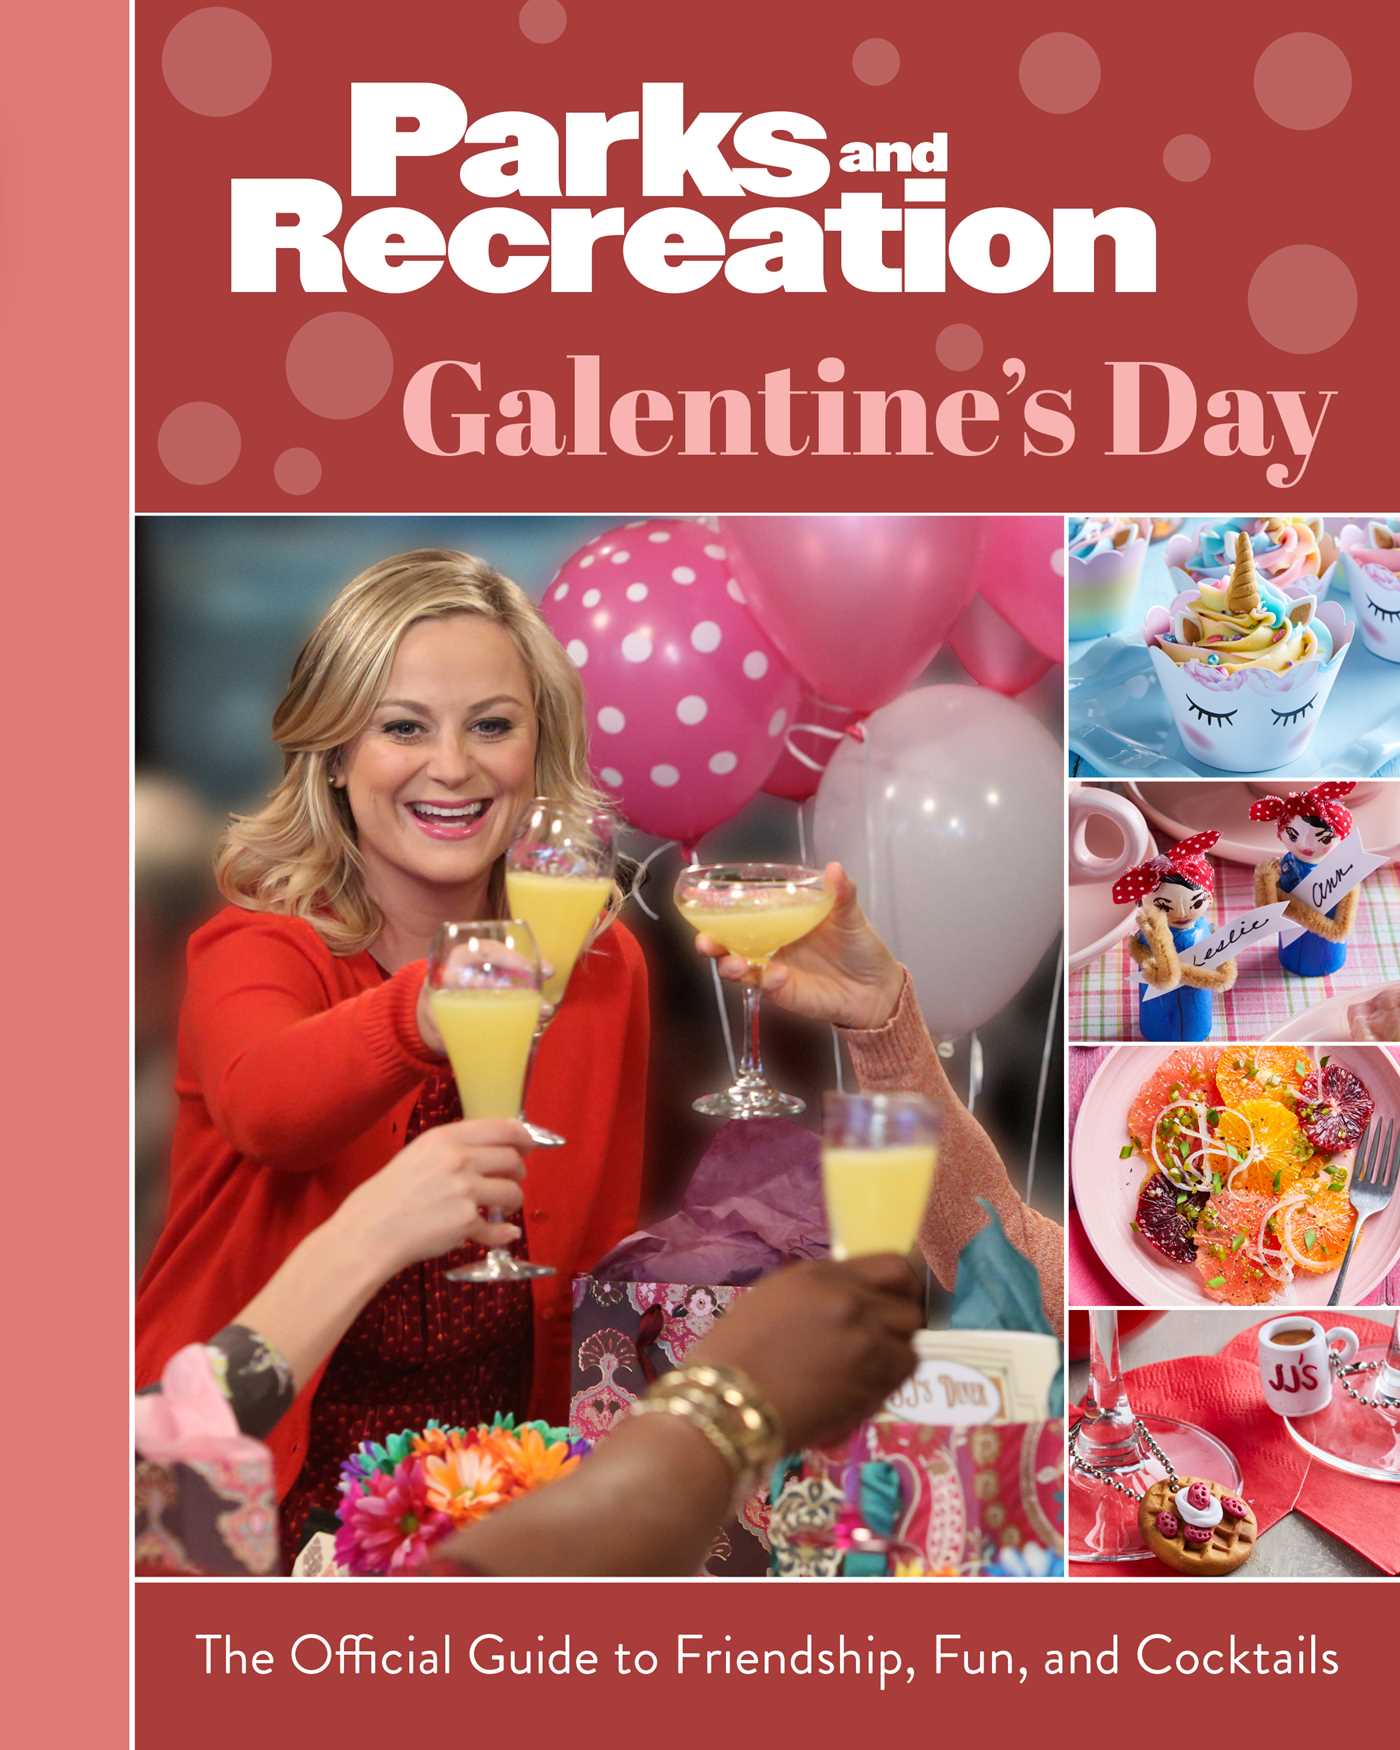 Image for "Parks and Recreation: Galentine's Day"